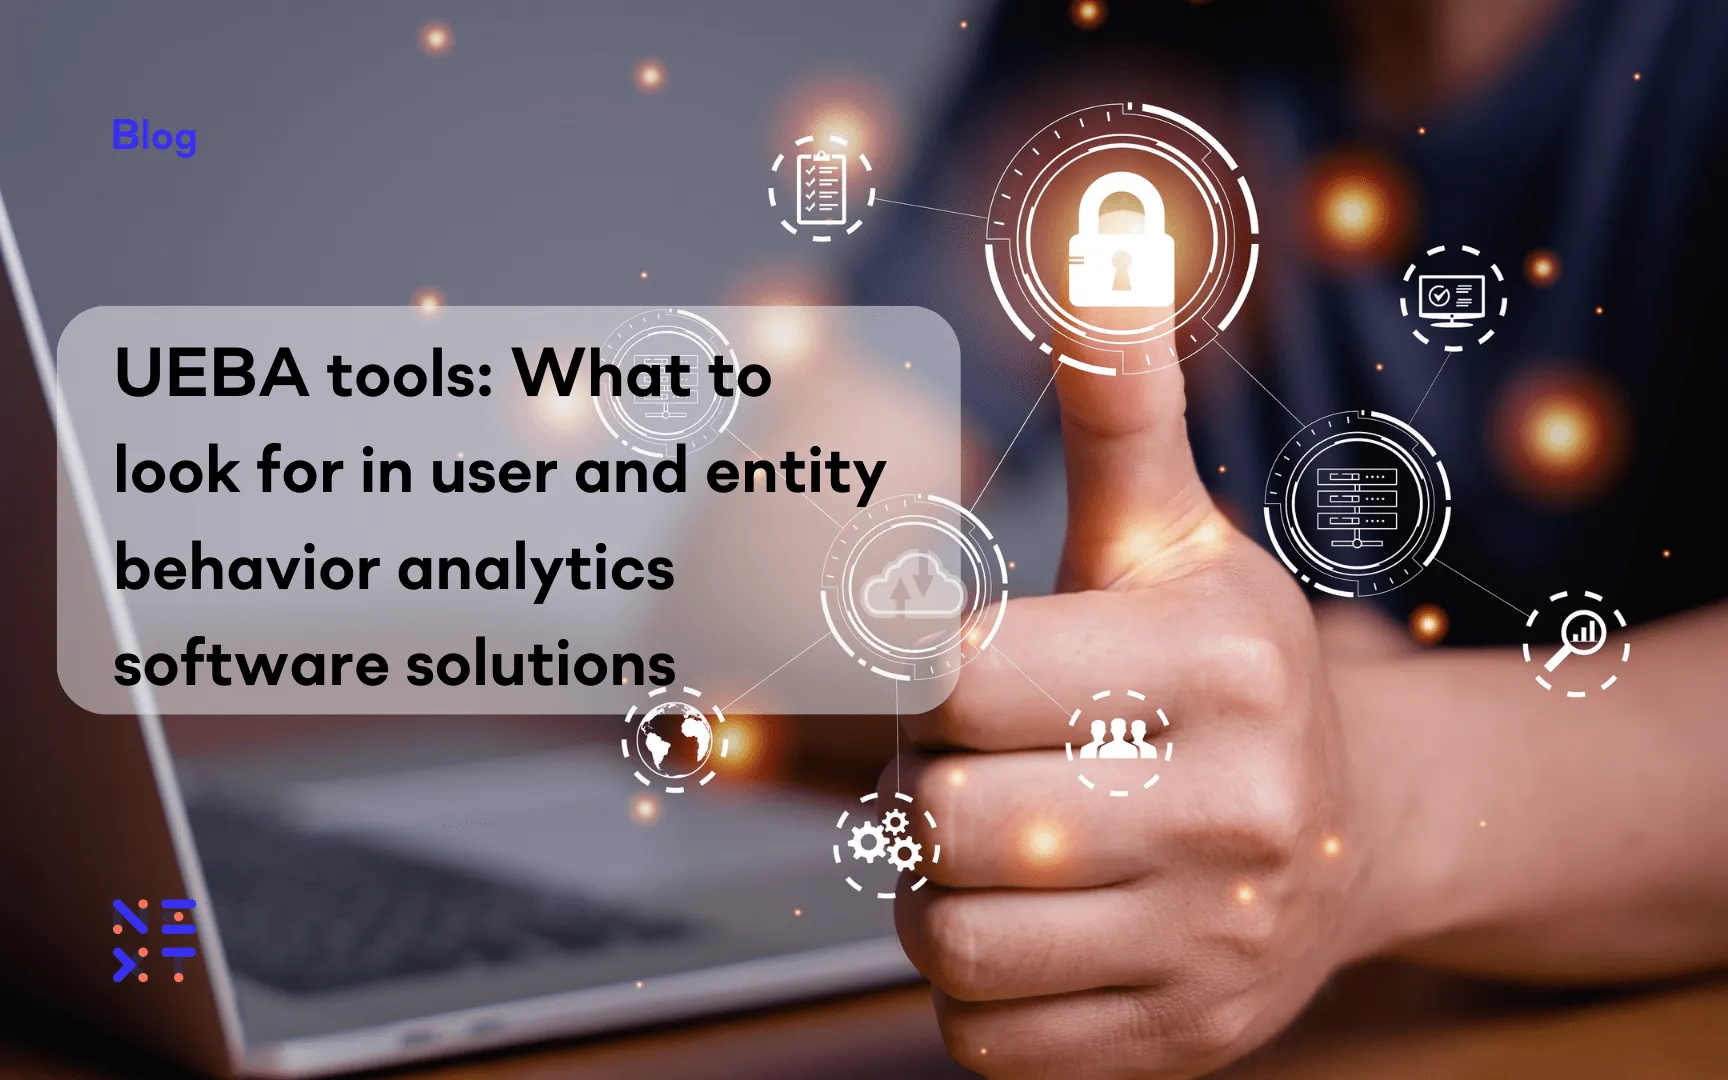 UEBA tools: What to look for in user and entity behavior analytics software solutions